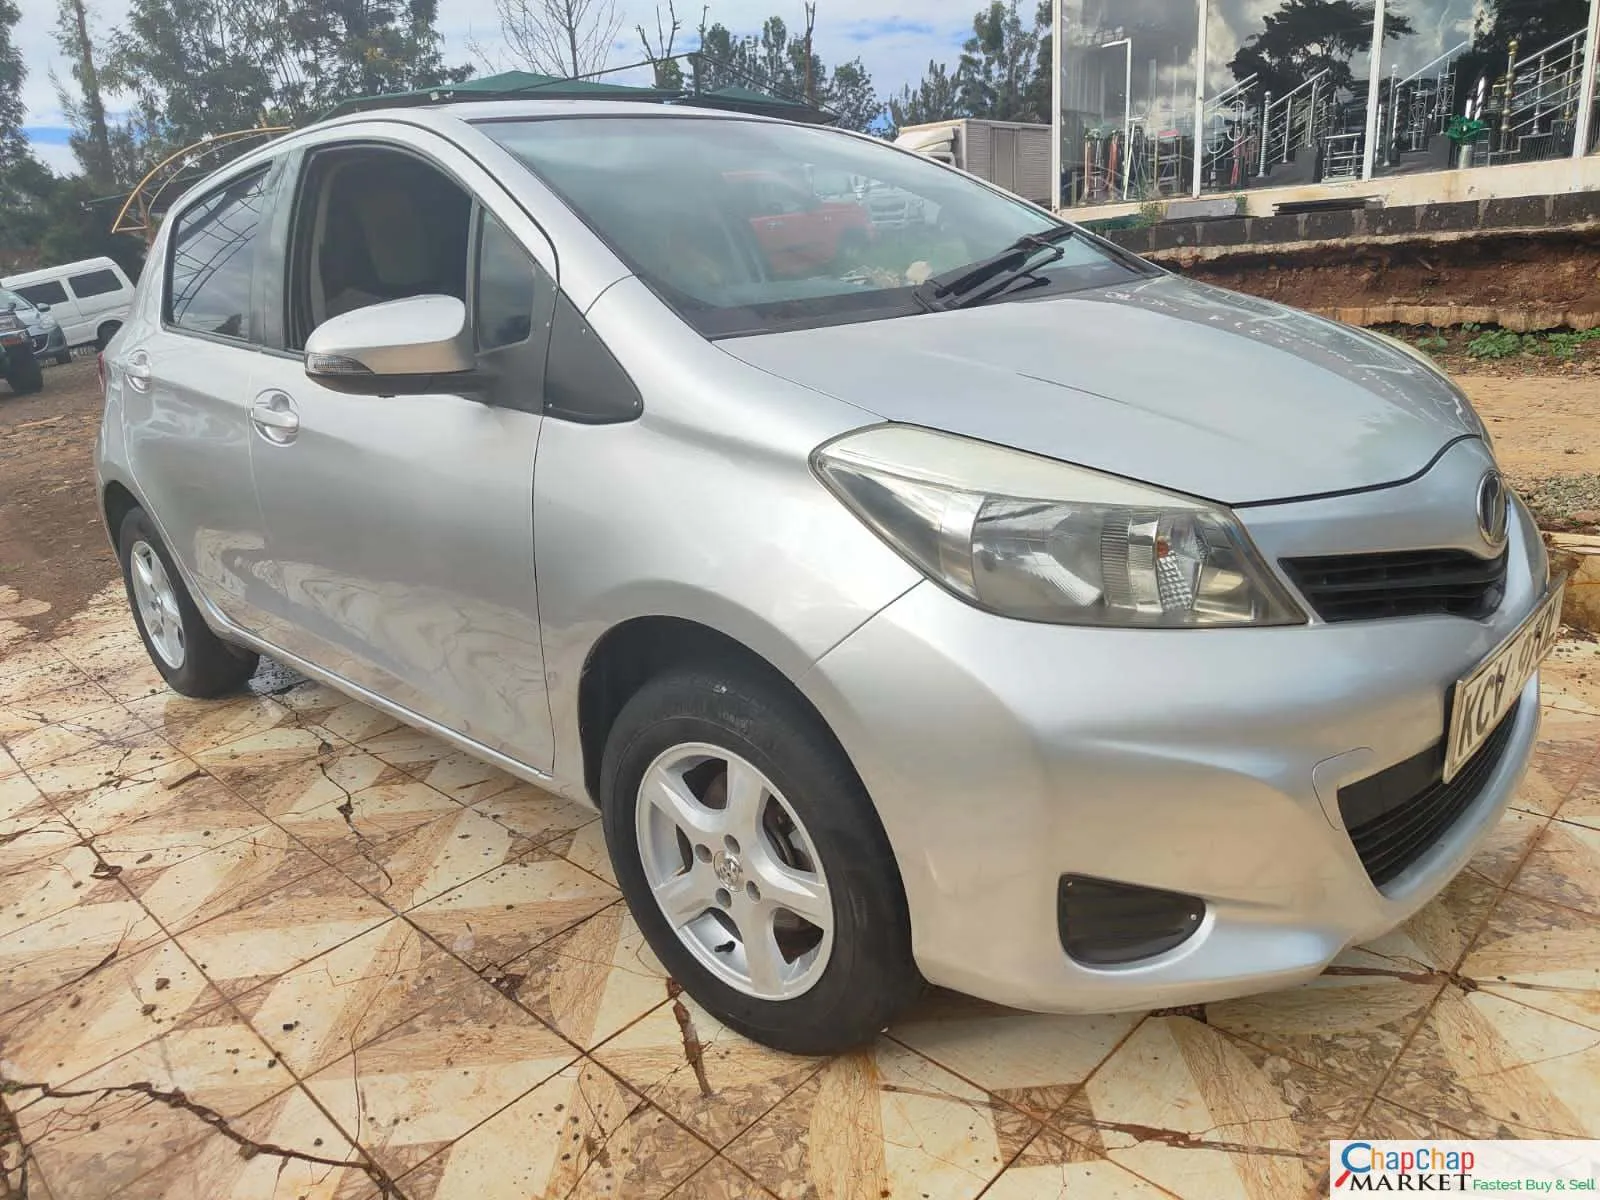 Toyota Vitz NEW SHAPE 1300cc You PAY 30% Deposit INSTALLMENTS Trade in Ok New Hire purchase installments